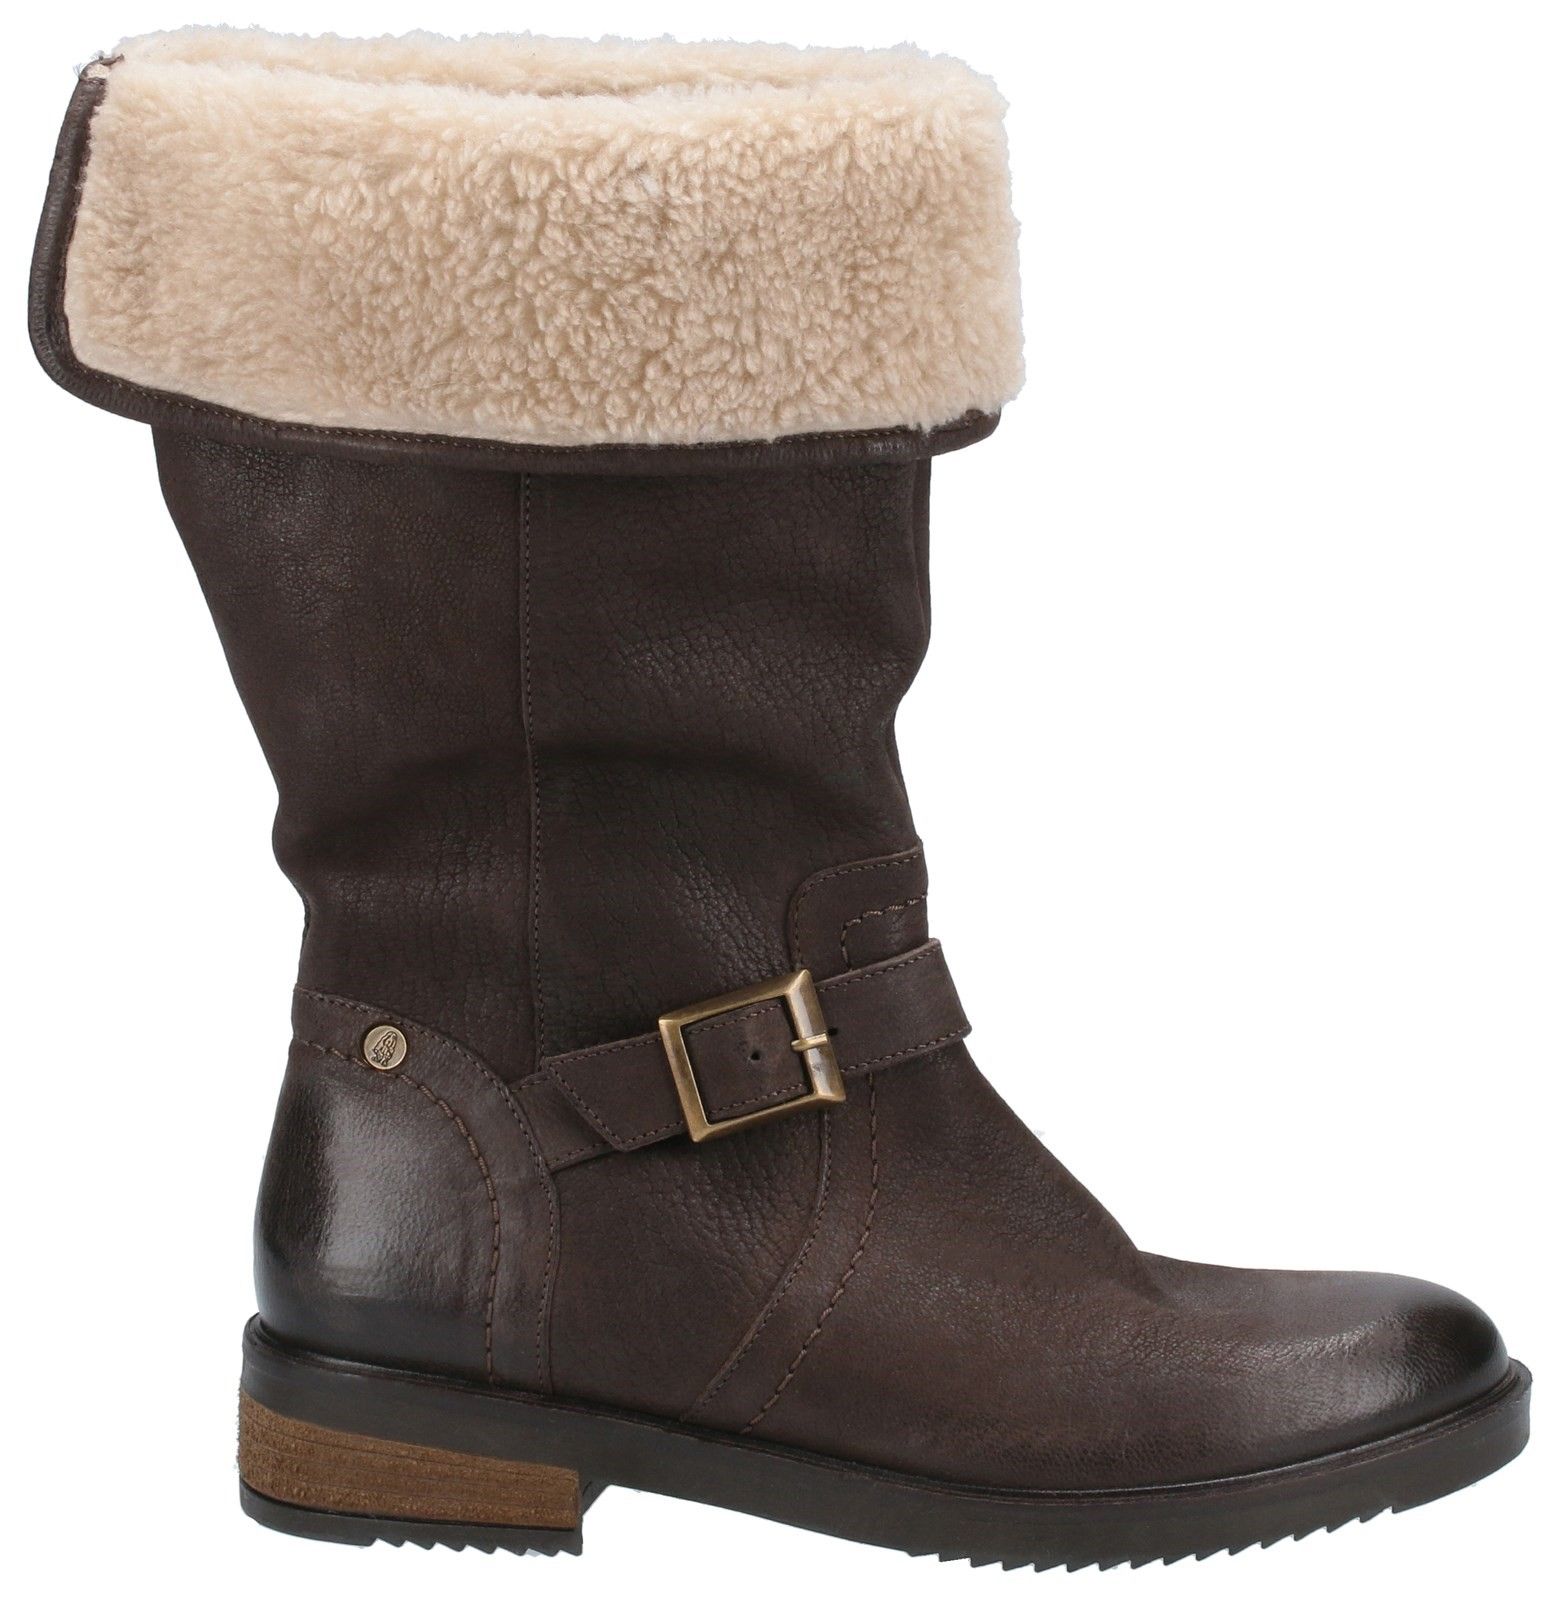 Bonnie is a stylish knee high tumbled leather boot with cosy fleece lining and faux shearling collar. A comfort memory foam leather sock cushions the feat whilst the rubber shark tooth sole gives extra grip.Casual tumbled leather and faux shearling upper. 
Cosy fleece lining with faux shearling collar. 
Cushion comfort memory foam leather sock. 
Functioning inside hidden half zip for ease. 
Flexible and hardwearing TPR unit with leather effect heel and rubber shark tooth sole for extra grip.